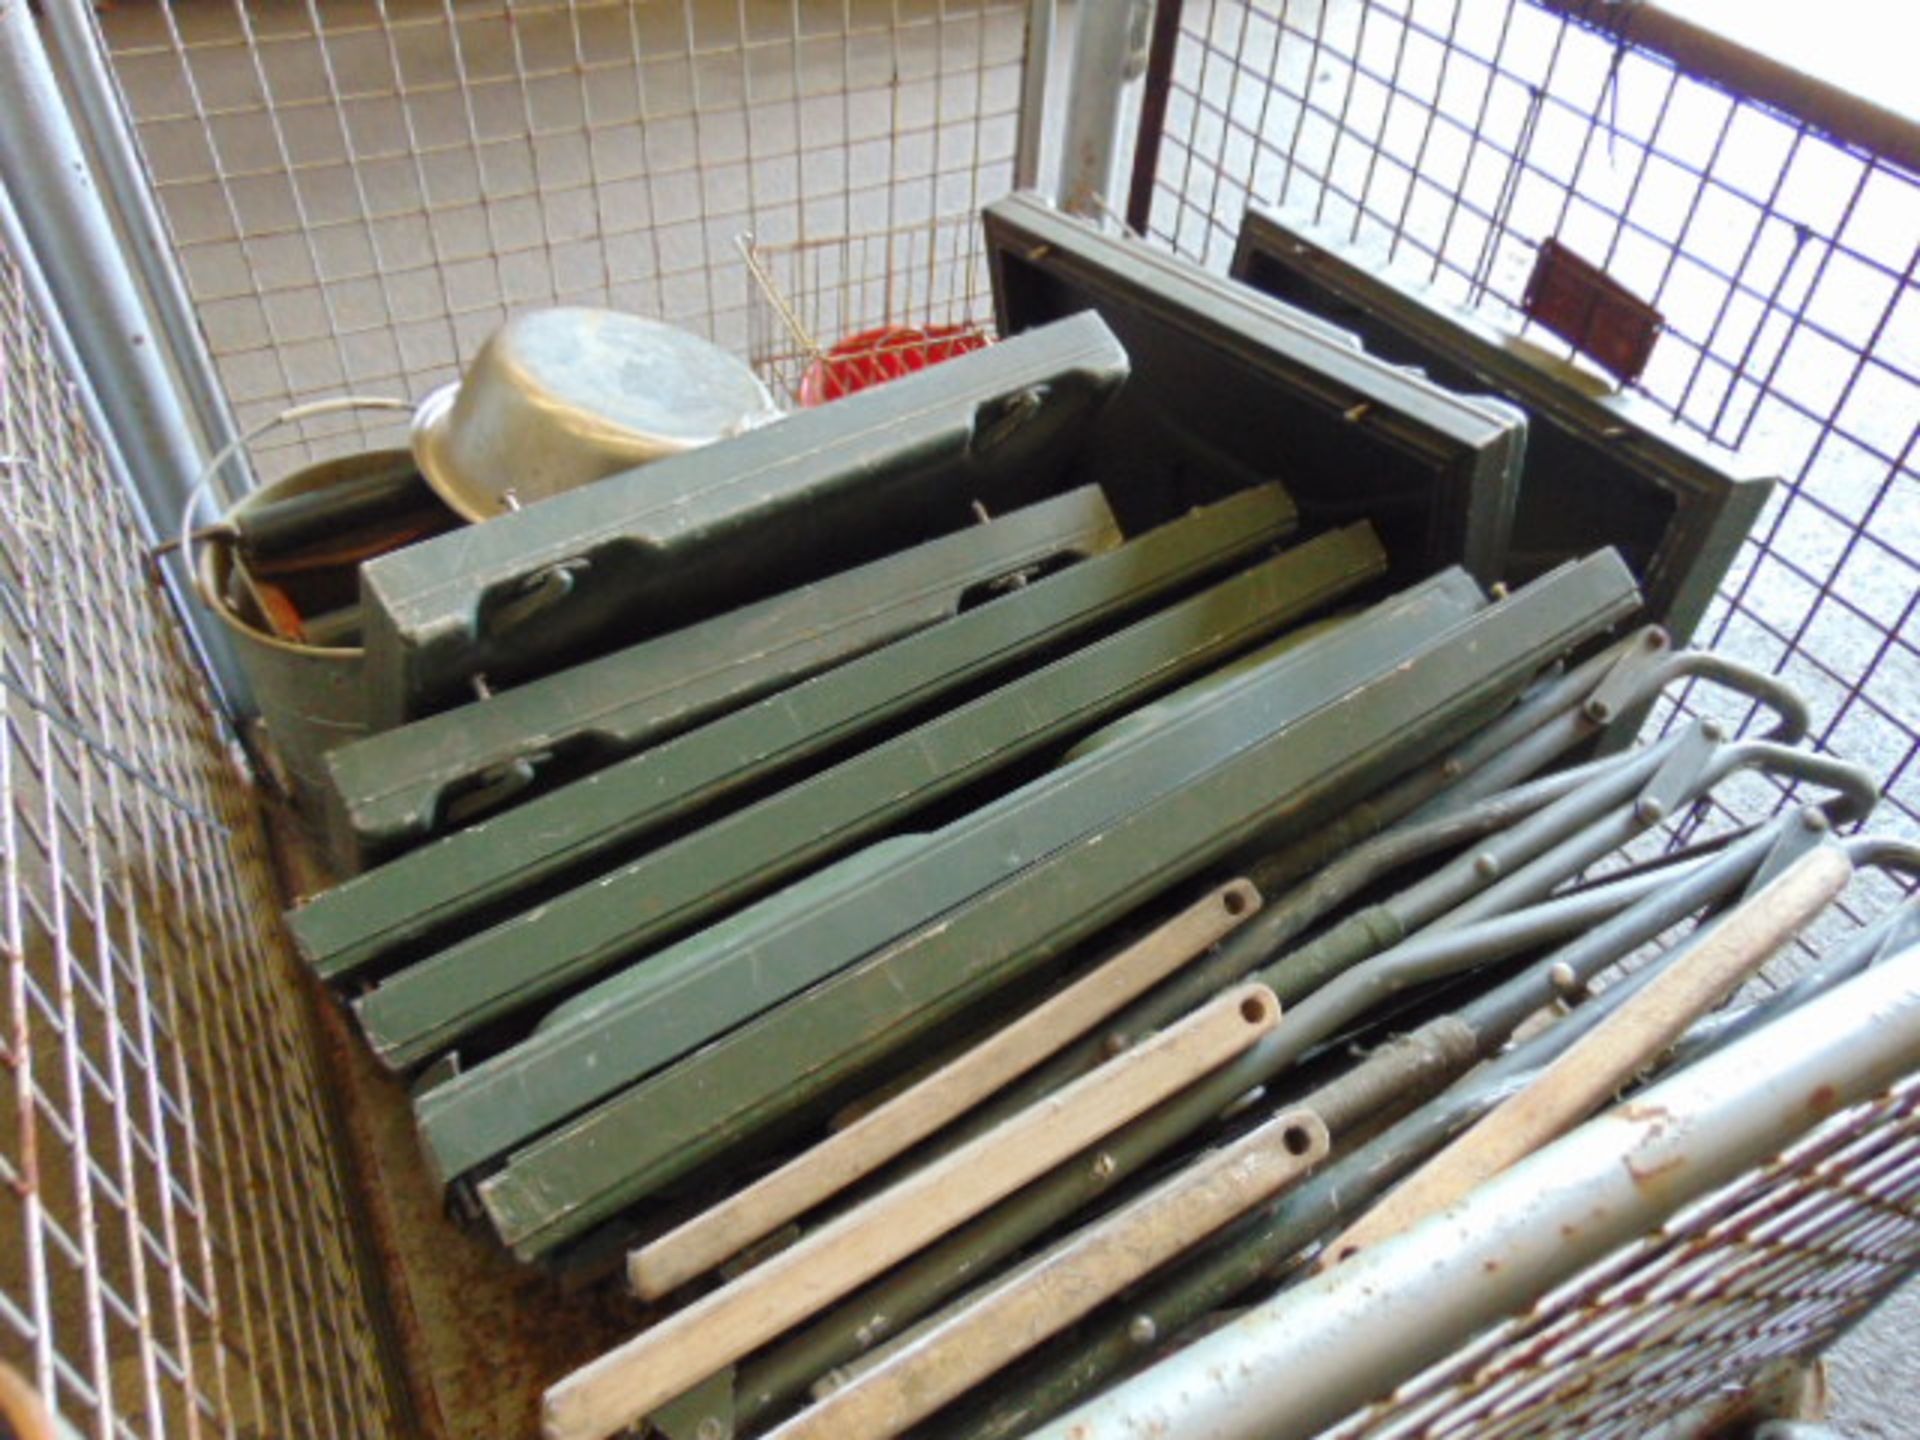 1 x Stillage of British Army Cooking Equipment Camp Chairs Etc - Image 2 of 6